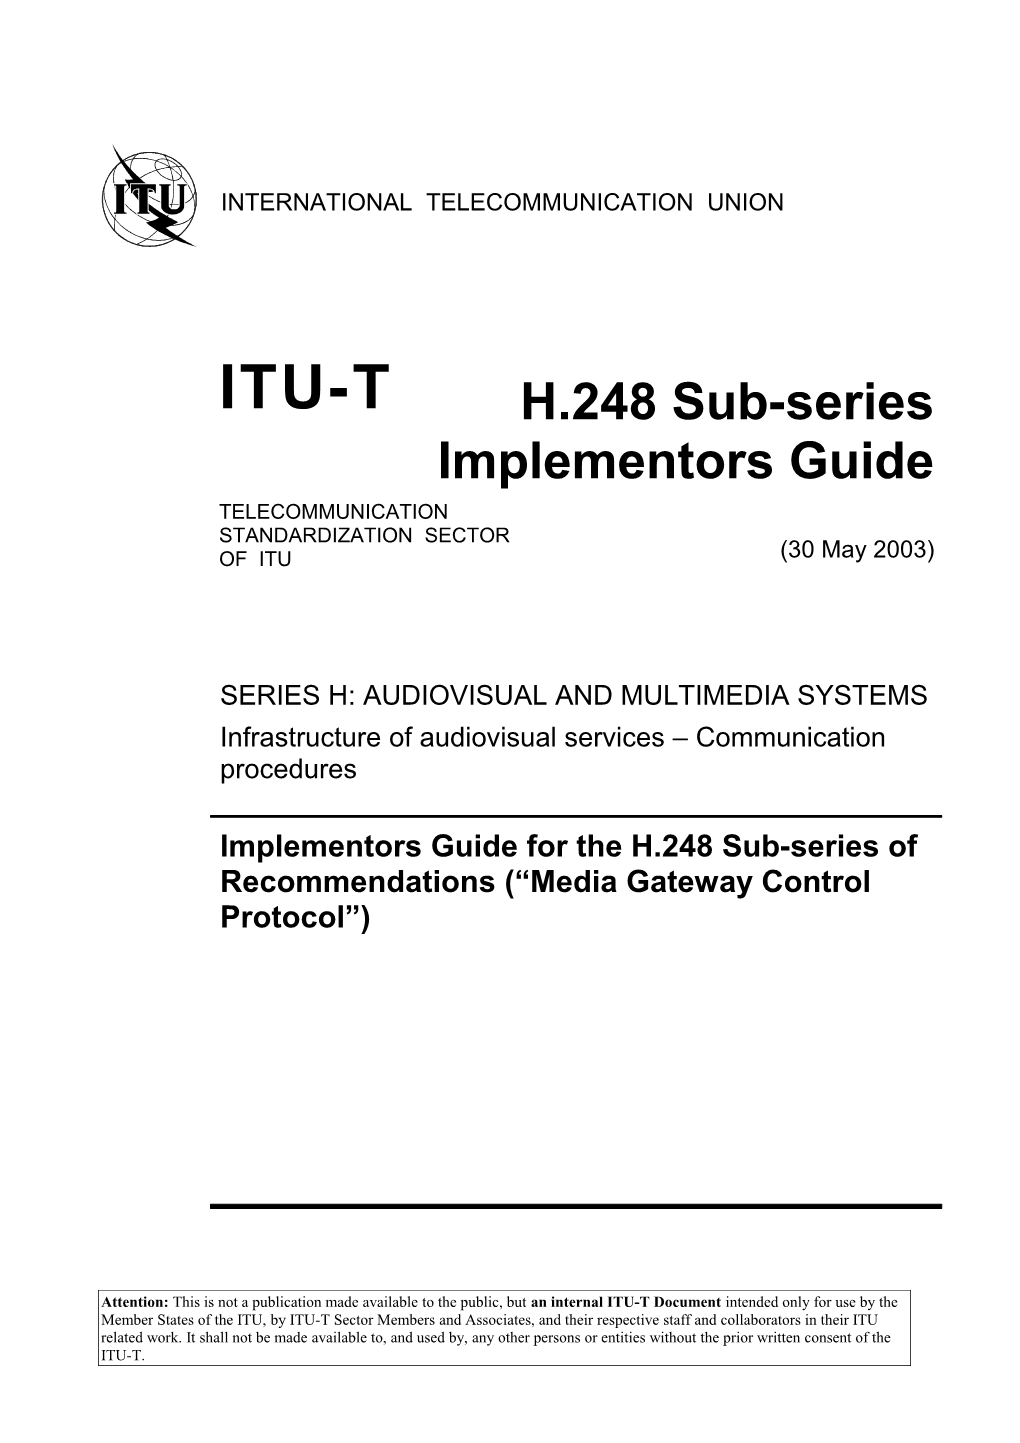 Implementers Guide for H.248 Sub-Series of Recommendations1